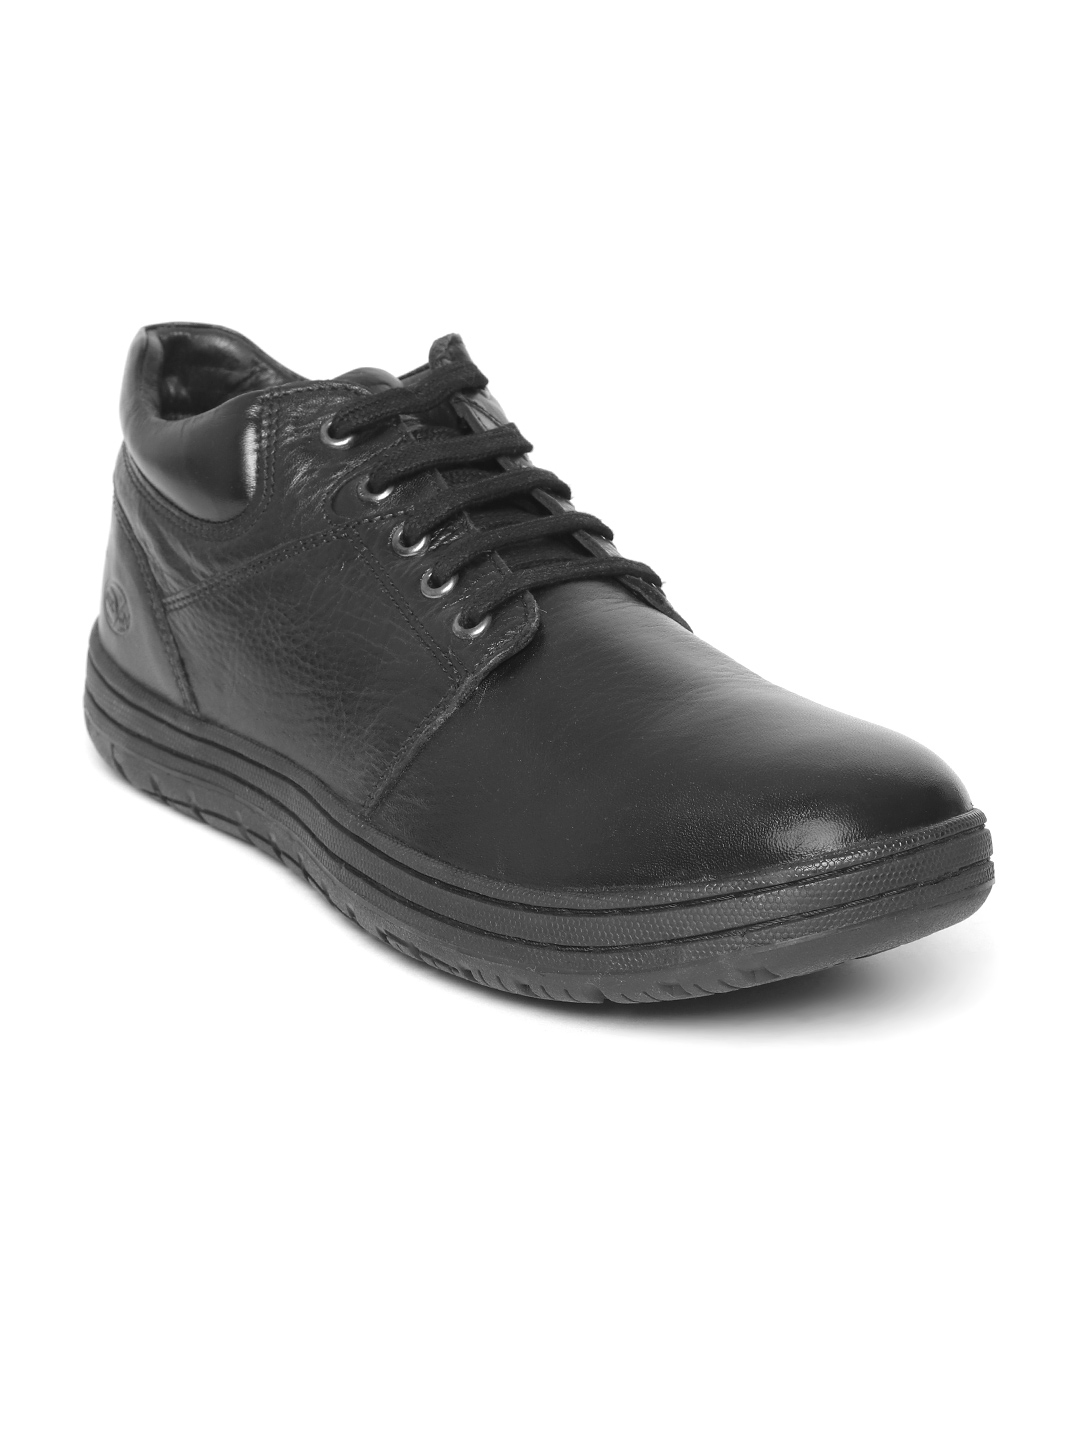 Buy Woodland Men Black Solid Leather Sneakers - Casual Shoes for Men ...